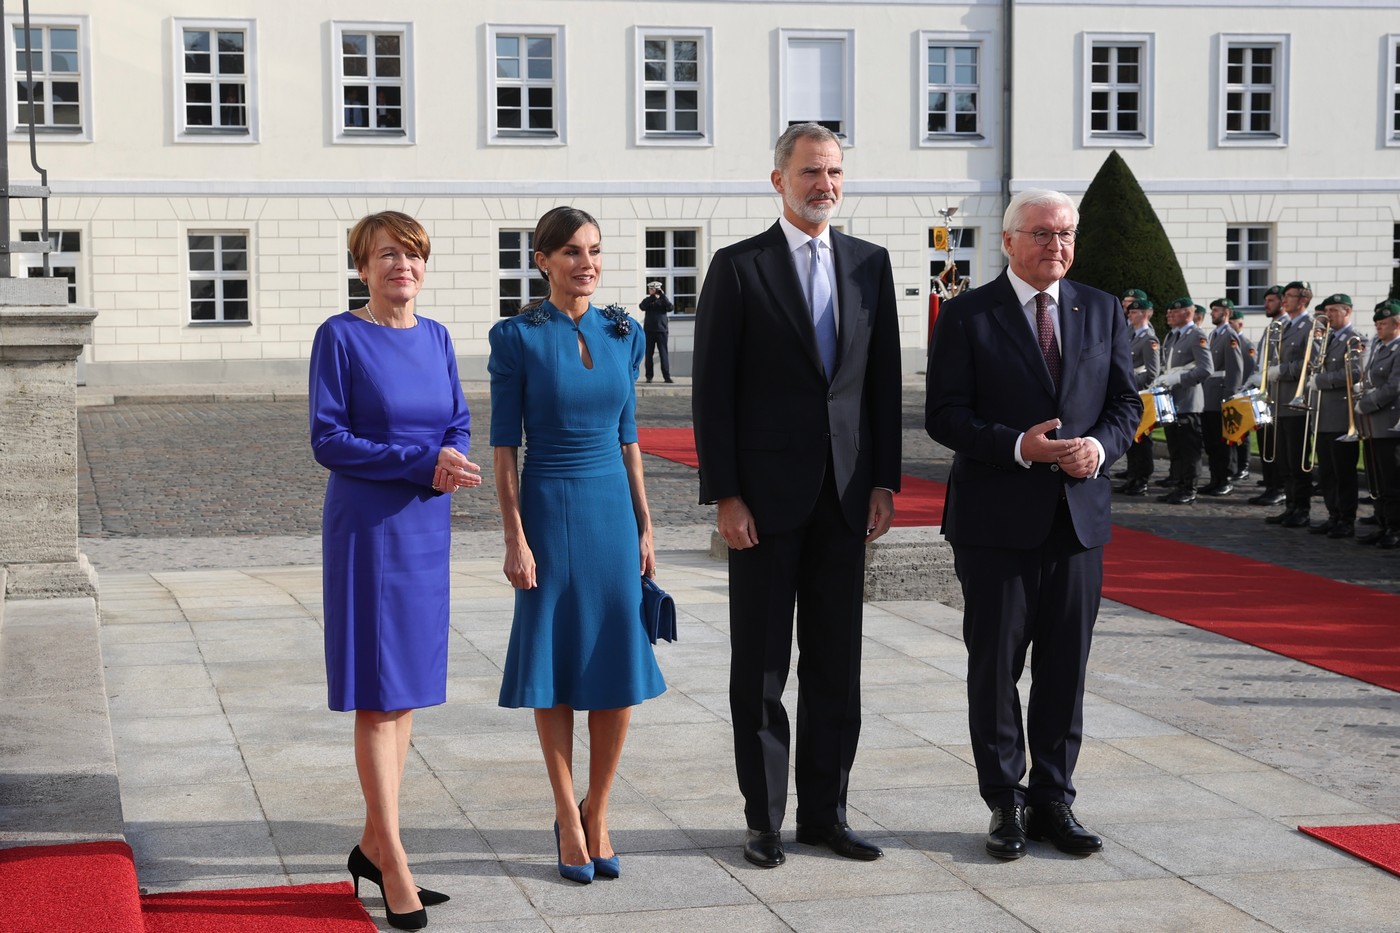 The President and First Lady of Germany, Frank-Walter Steinmeier and Elke Büdenbender, officially welcomed King Felipe and Queen Letizia of Spain at the Bellevue Palace in Berlin with Military Honours.